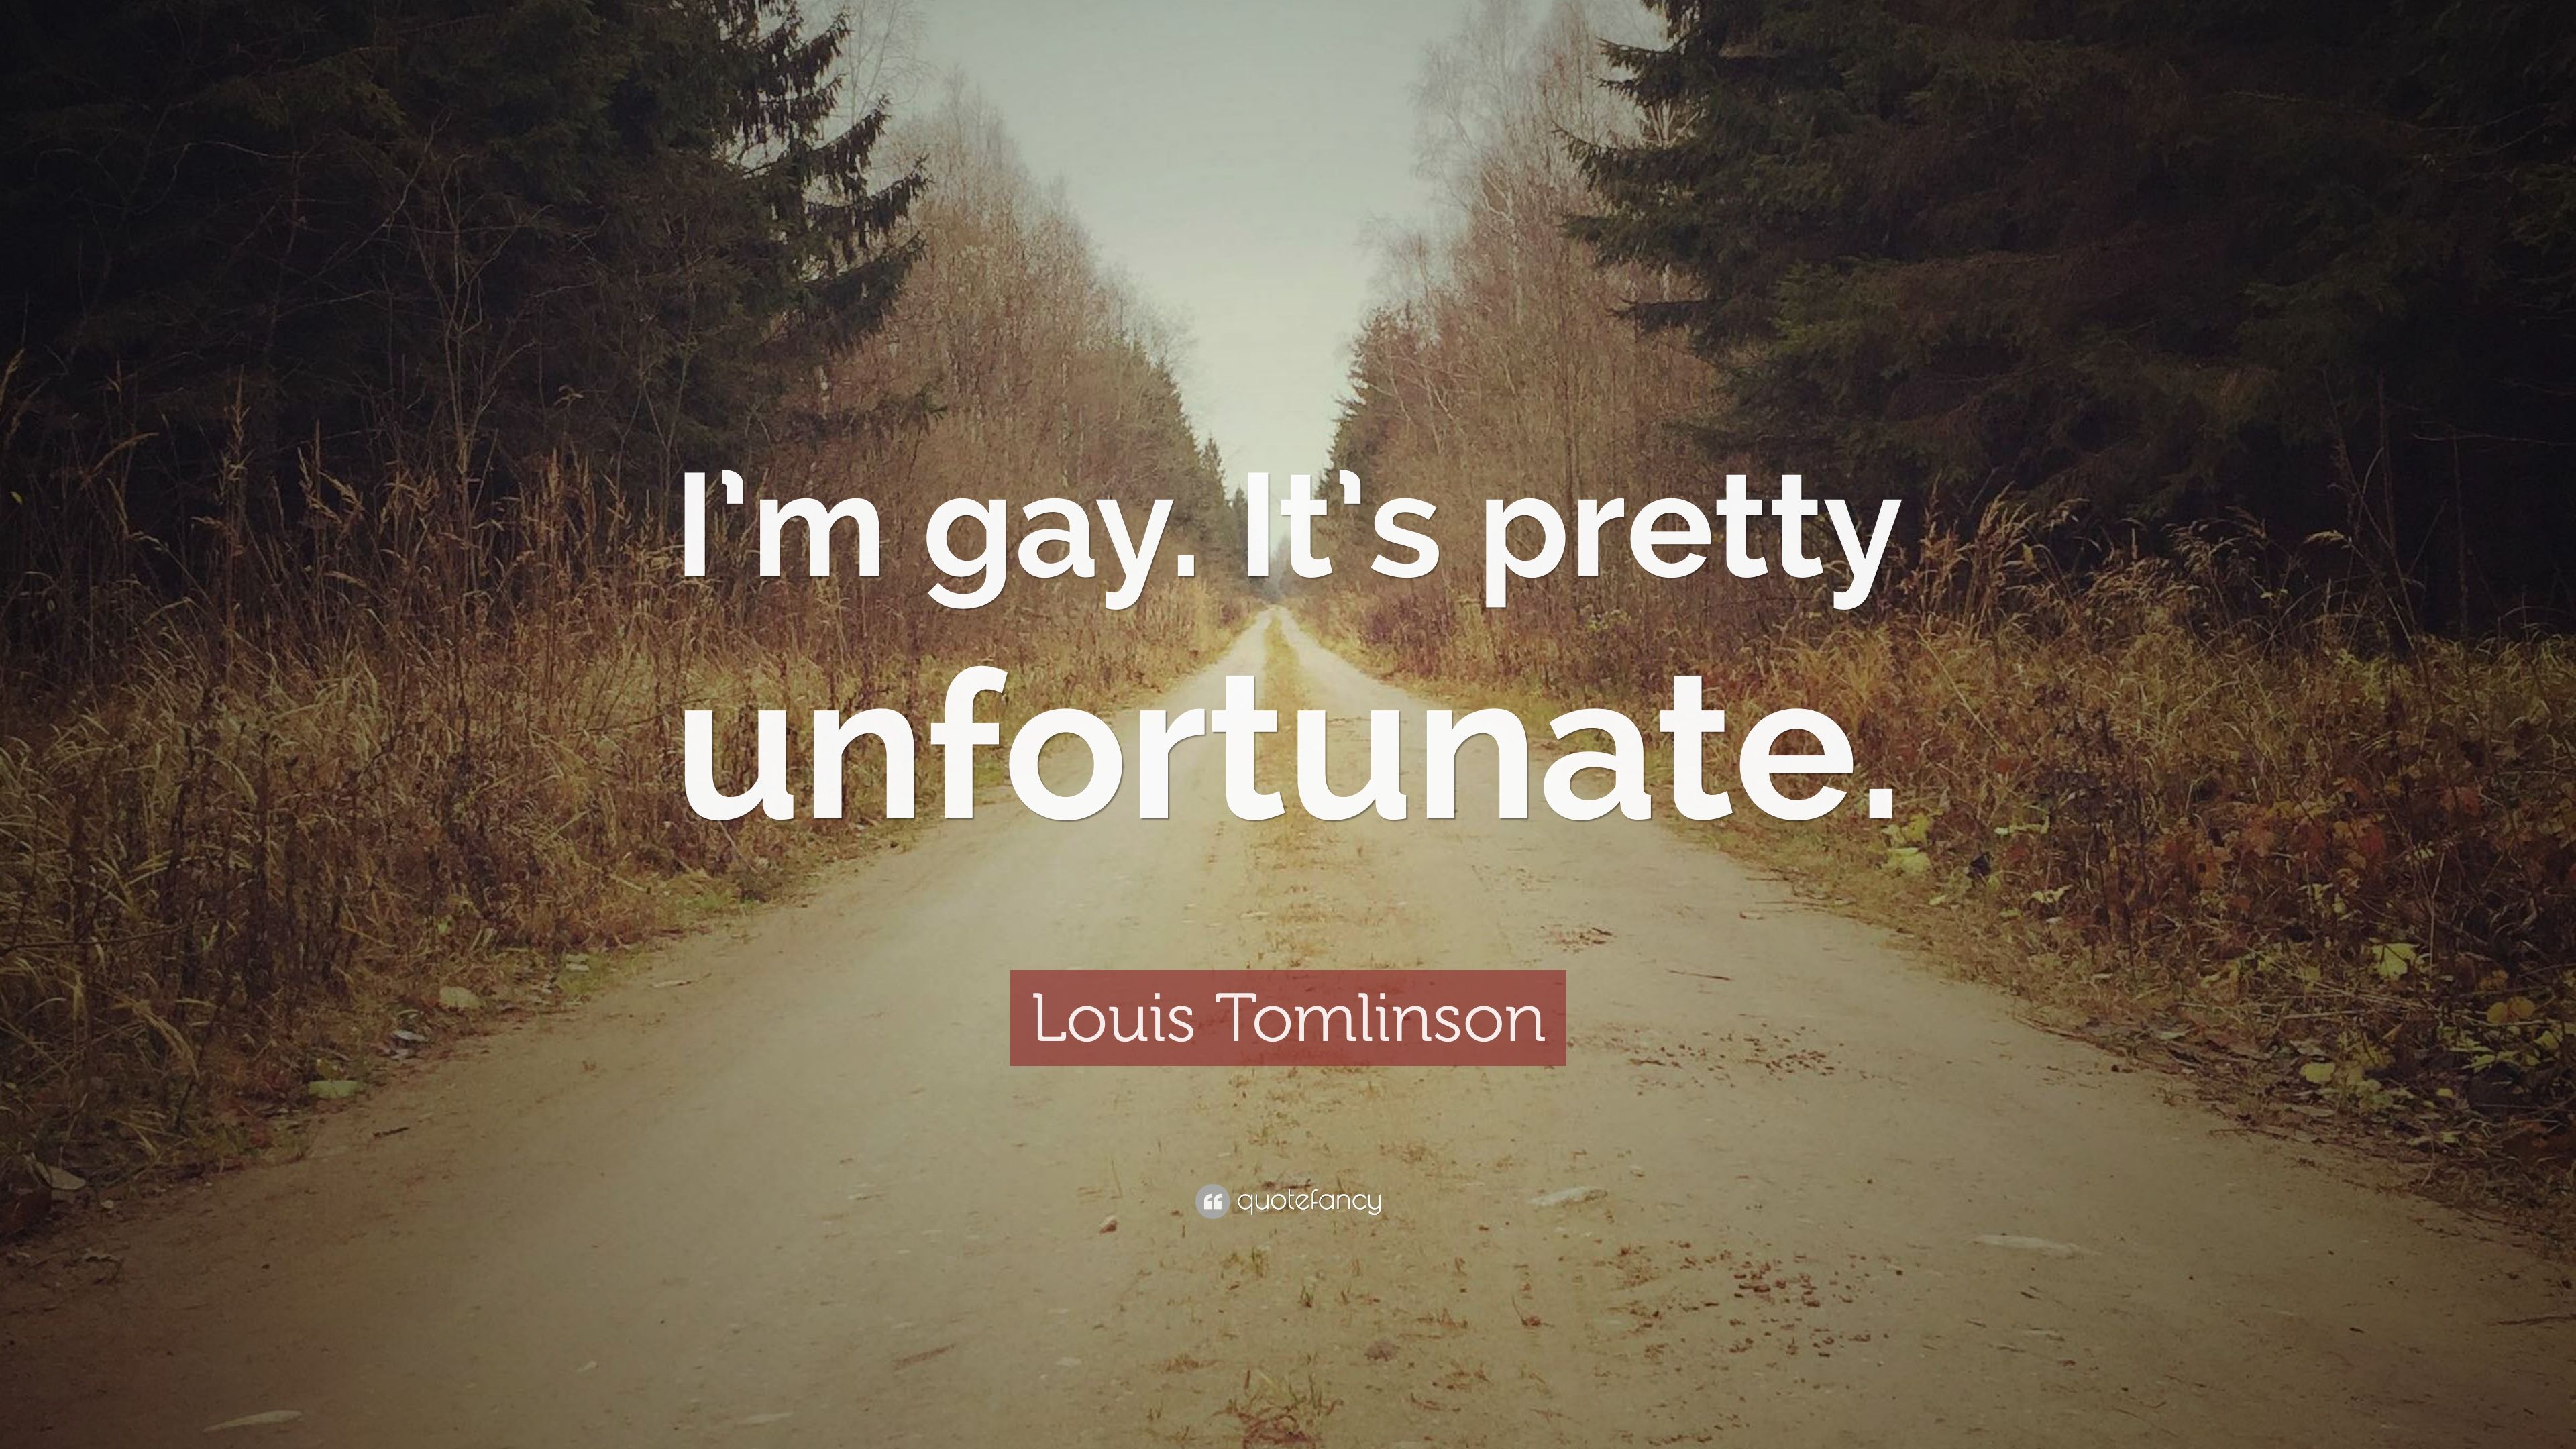 Louis Tomlinson Quote: “I'm gay. It's pretty unfortunate.” 12 wallpaper Quotefancy QUotes